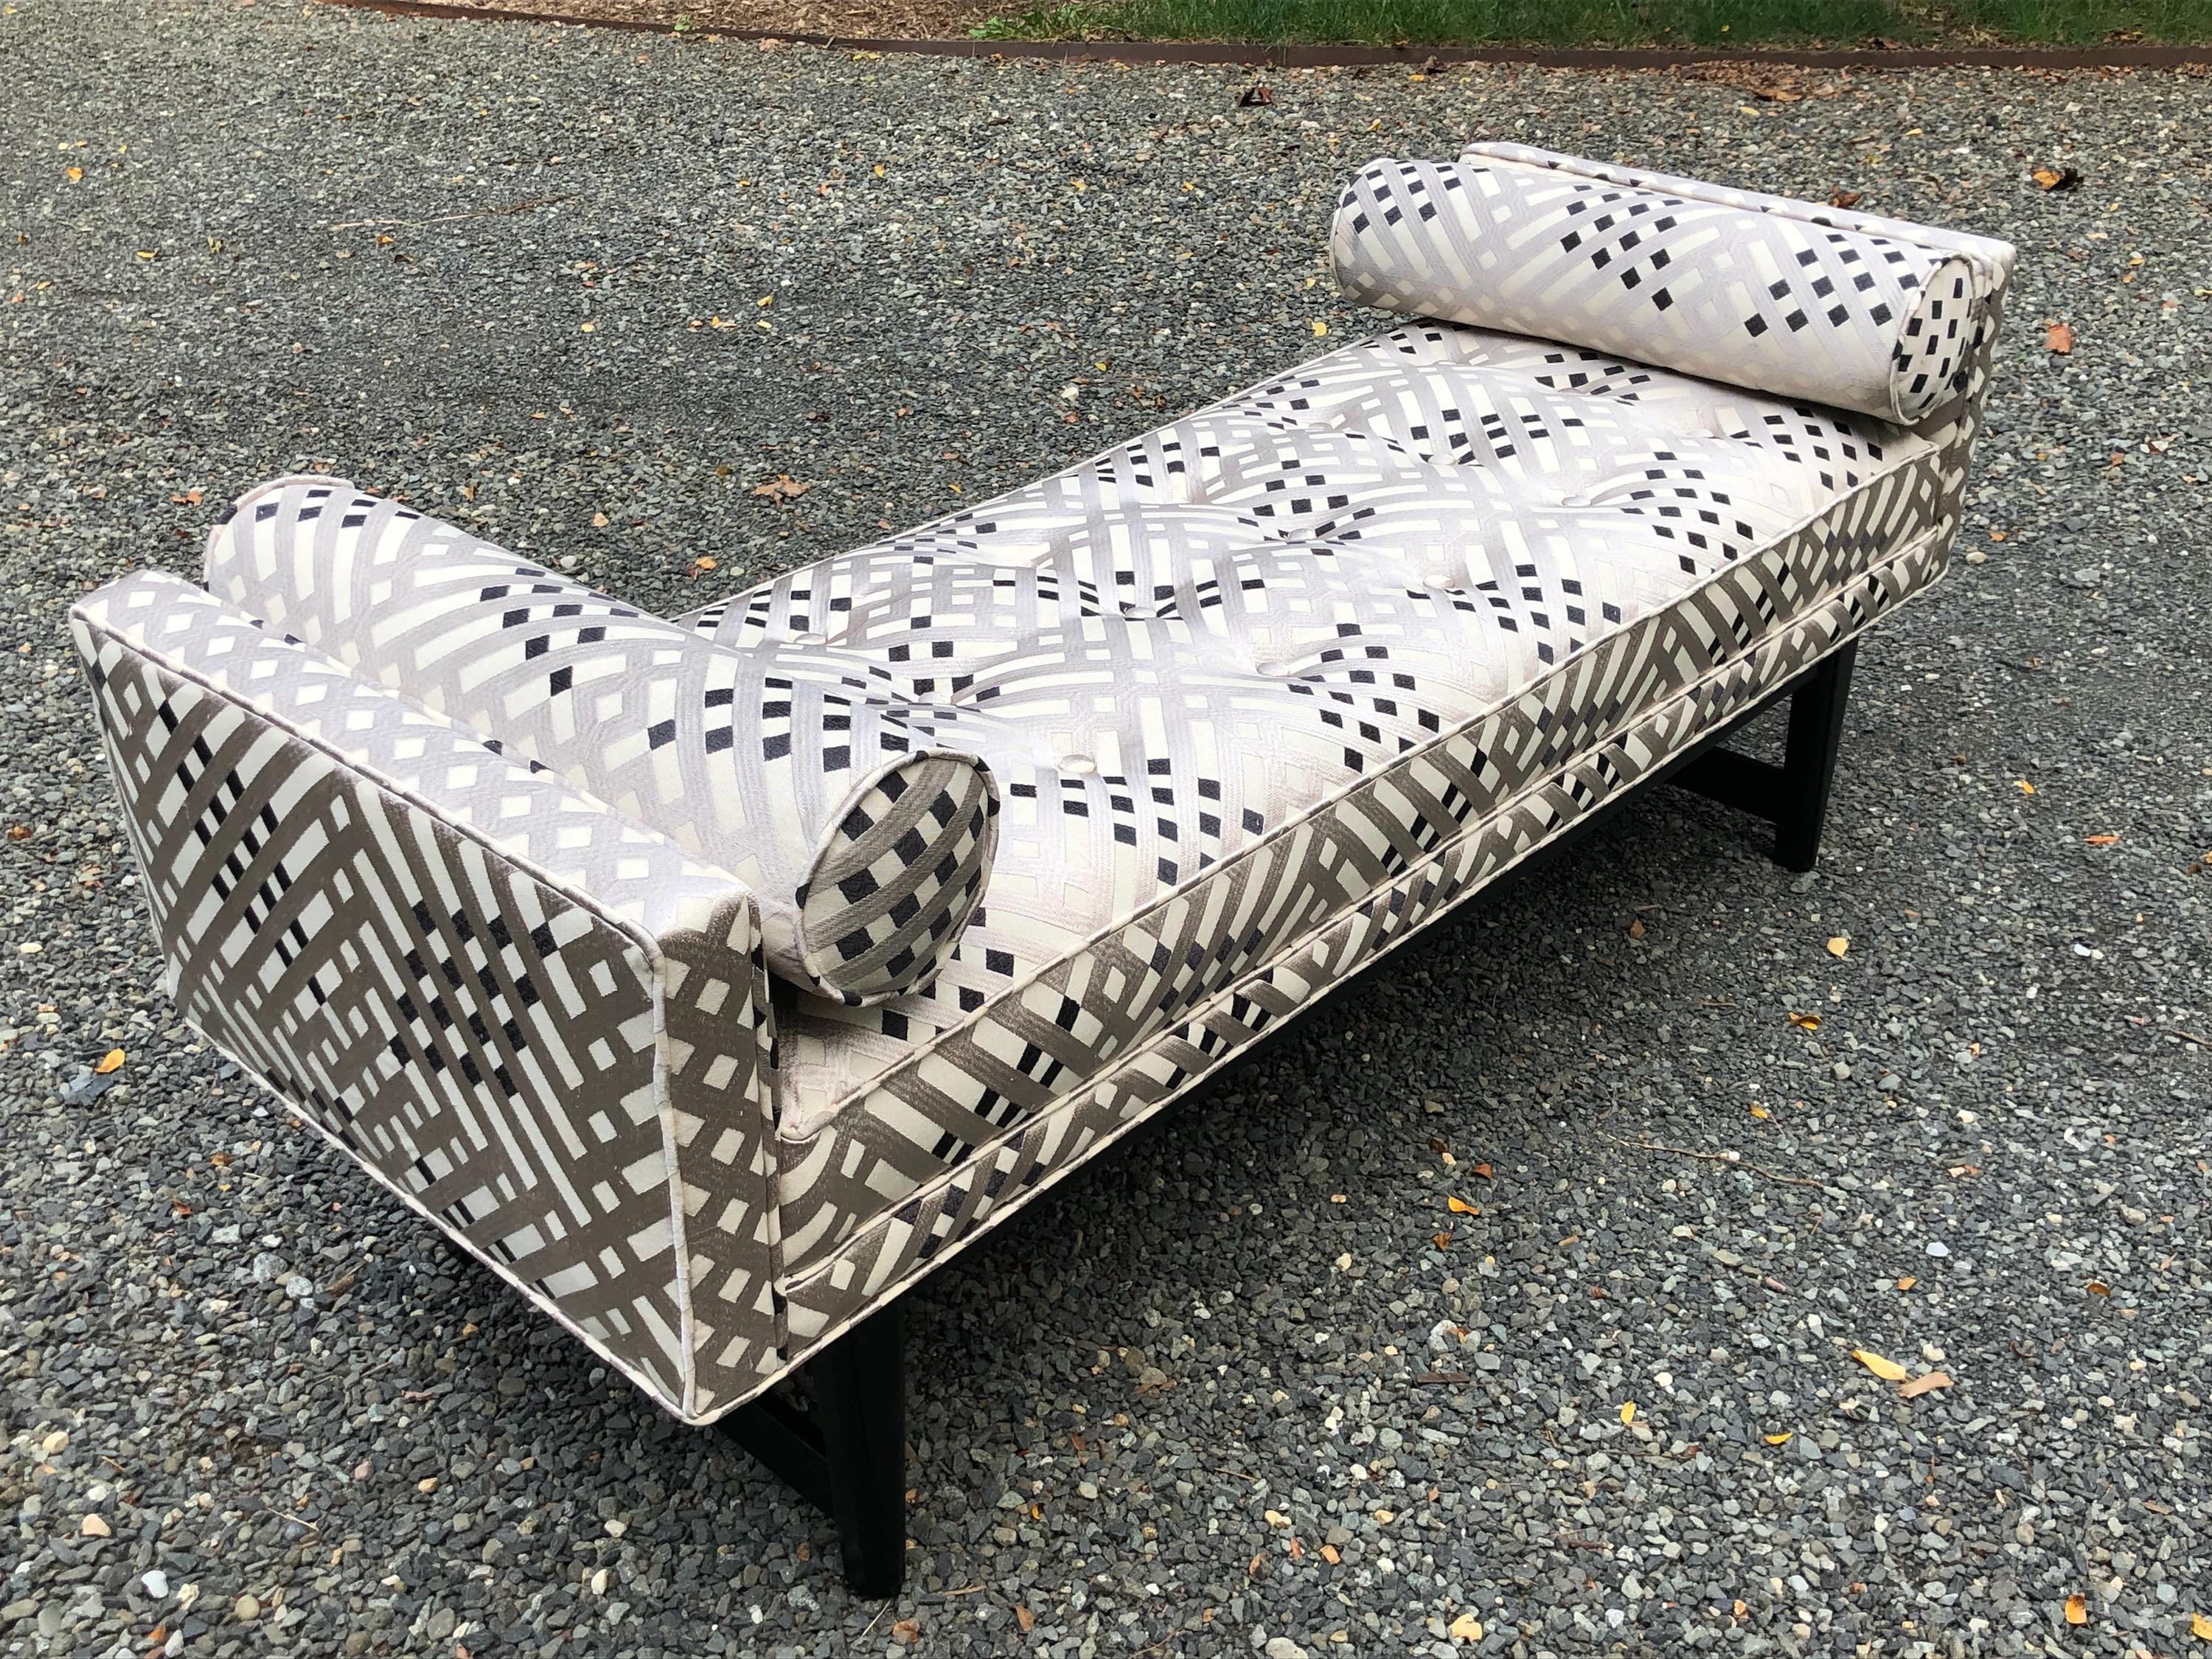 Classy Mid-Century Modern settee bench newly upholstered in a silvery grey, black and white stylized lattice fabric. Tufted seat, straight arms and ebonized legs. Rolled accent cushions.